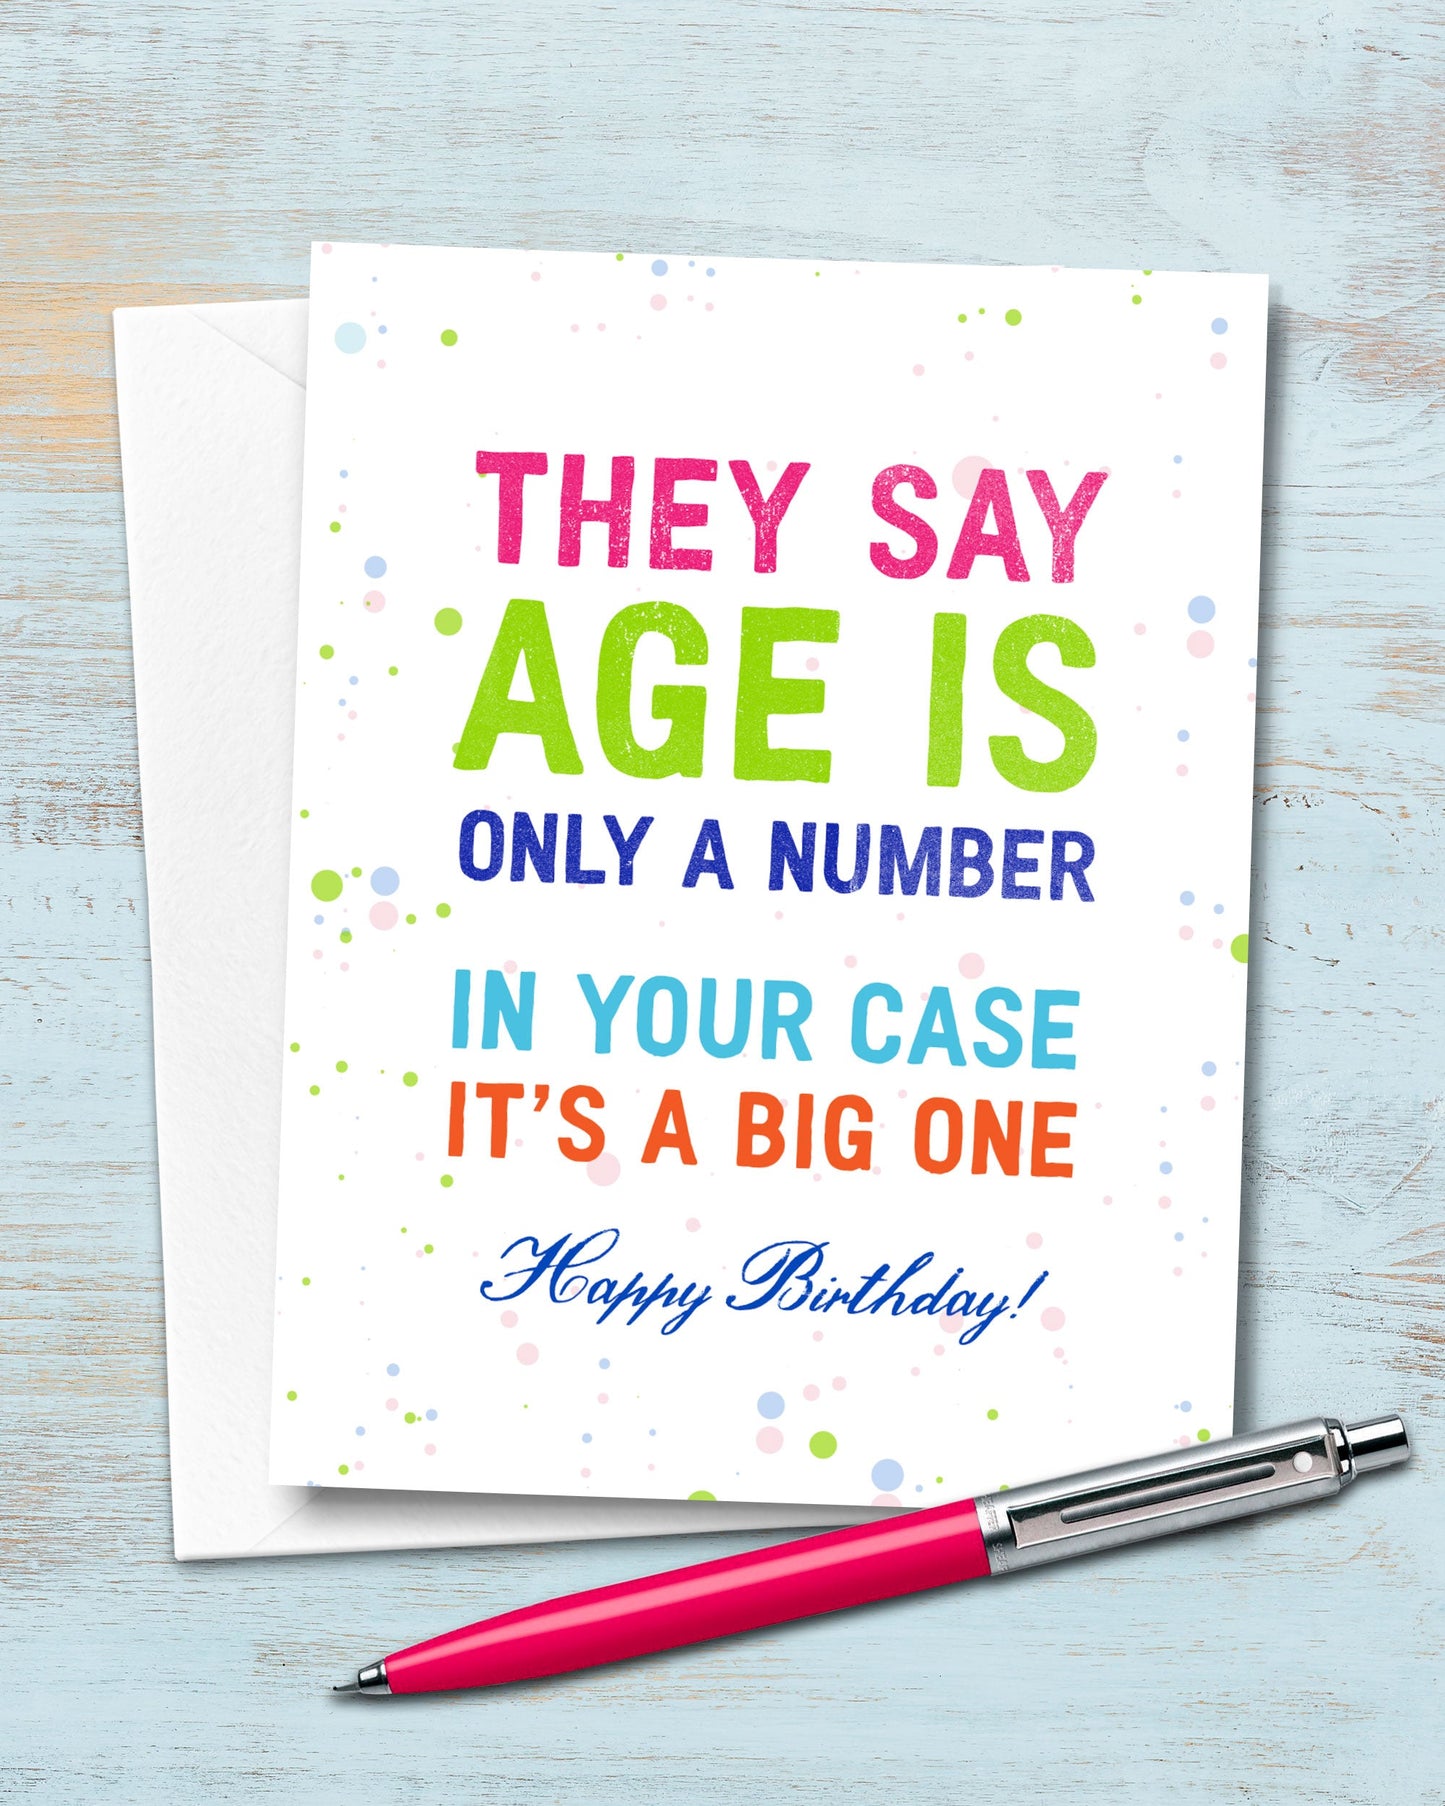 Age Is Only A Number Funny Birthday Card with pen - Transit Design - Smirkantile